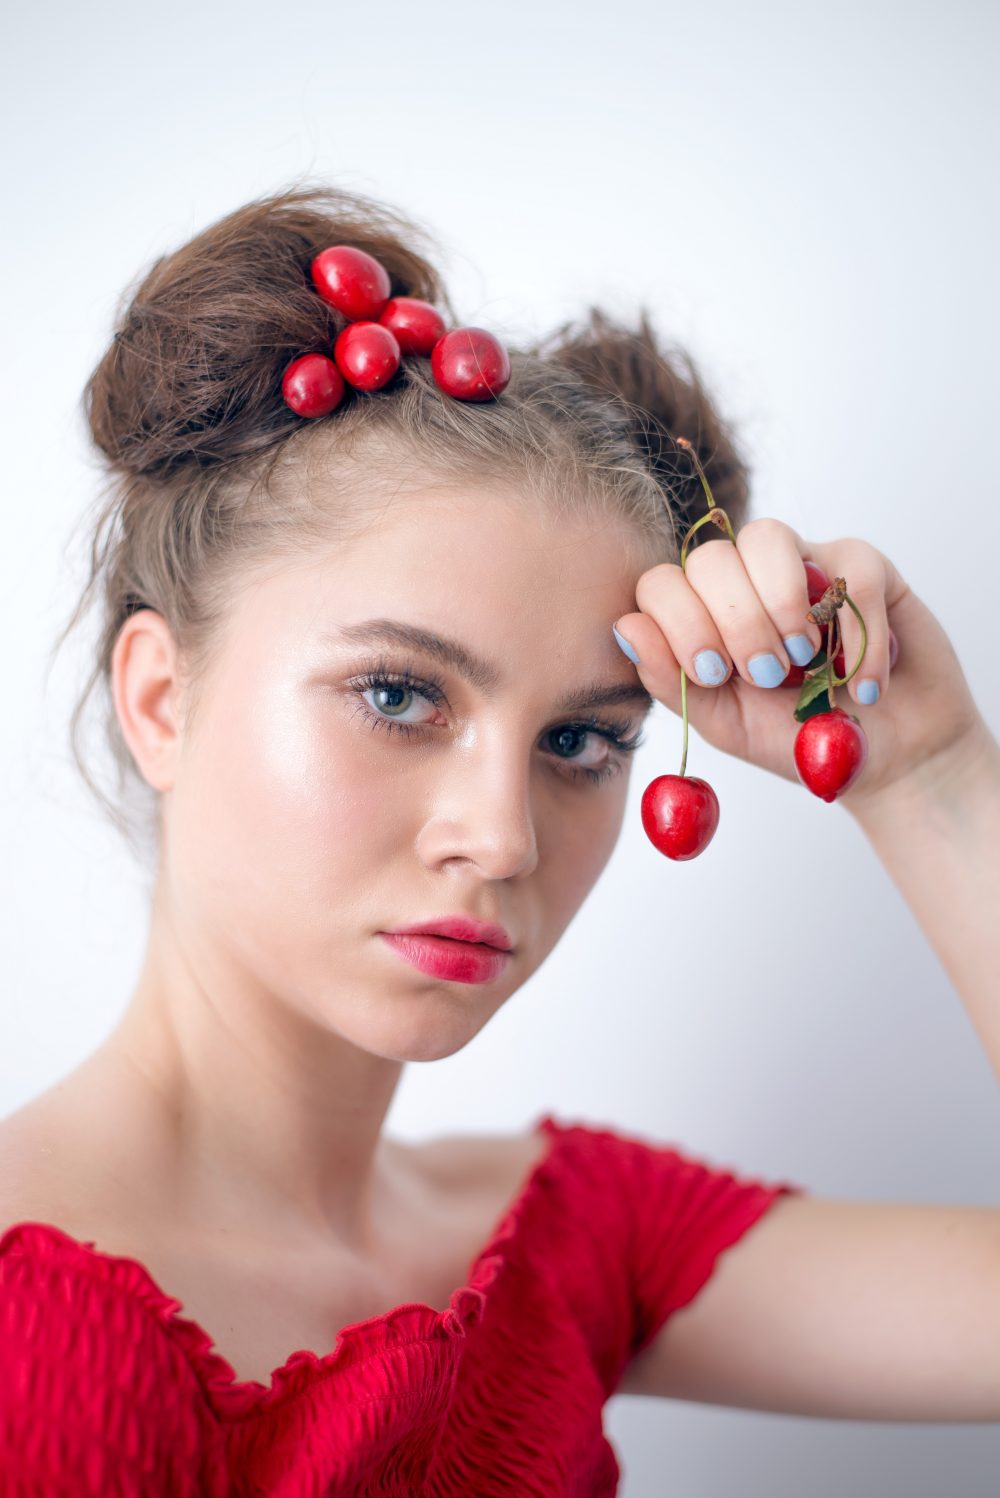 girl with double bun hairstyle holds cherries in one hand